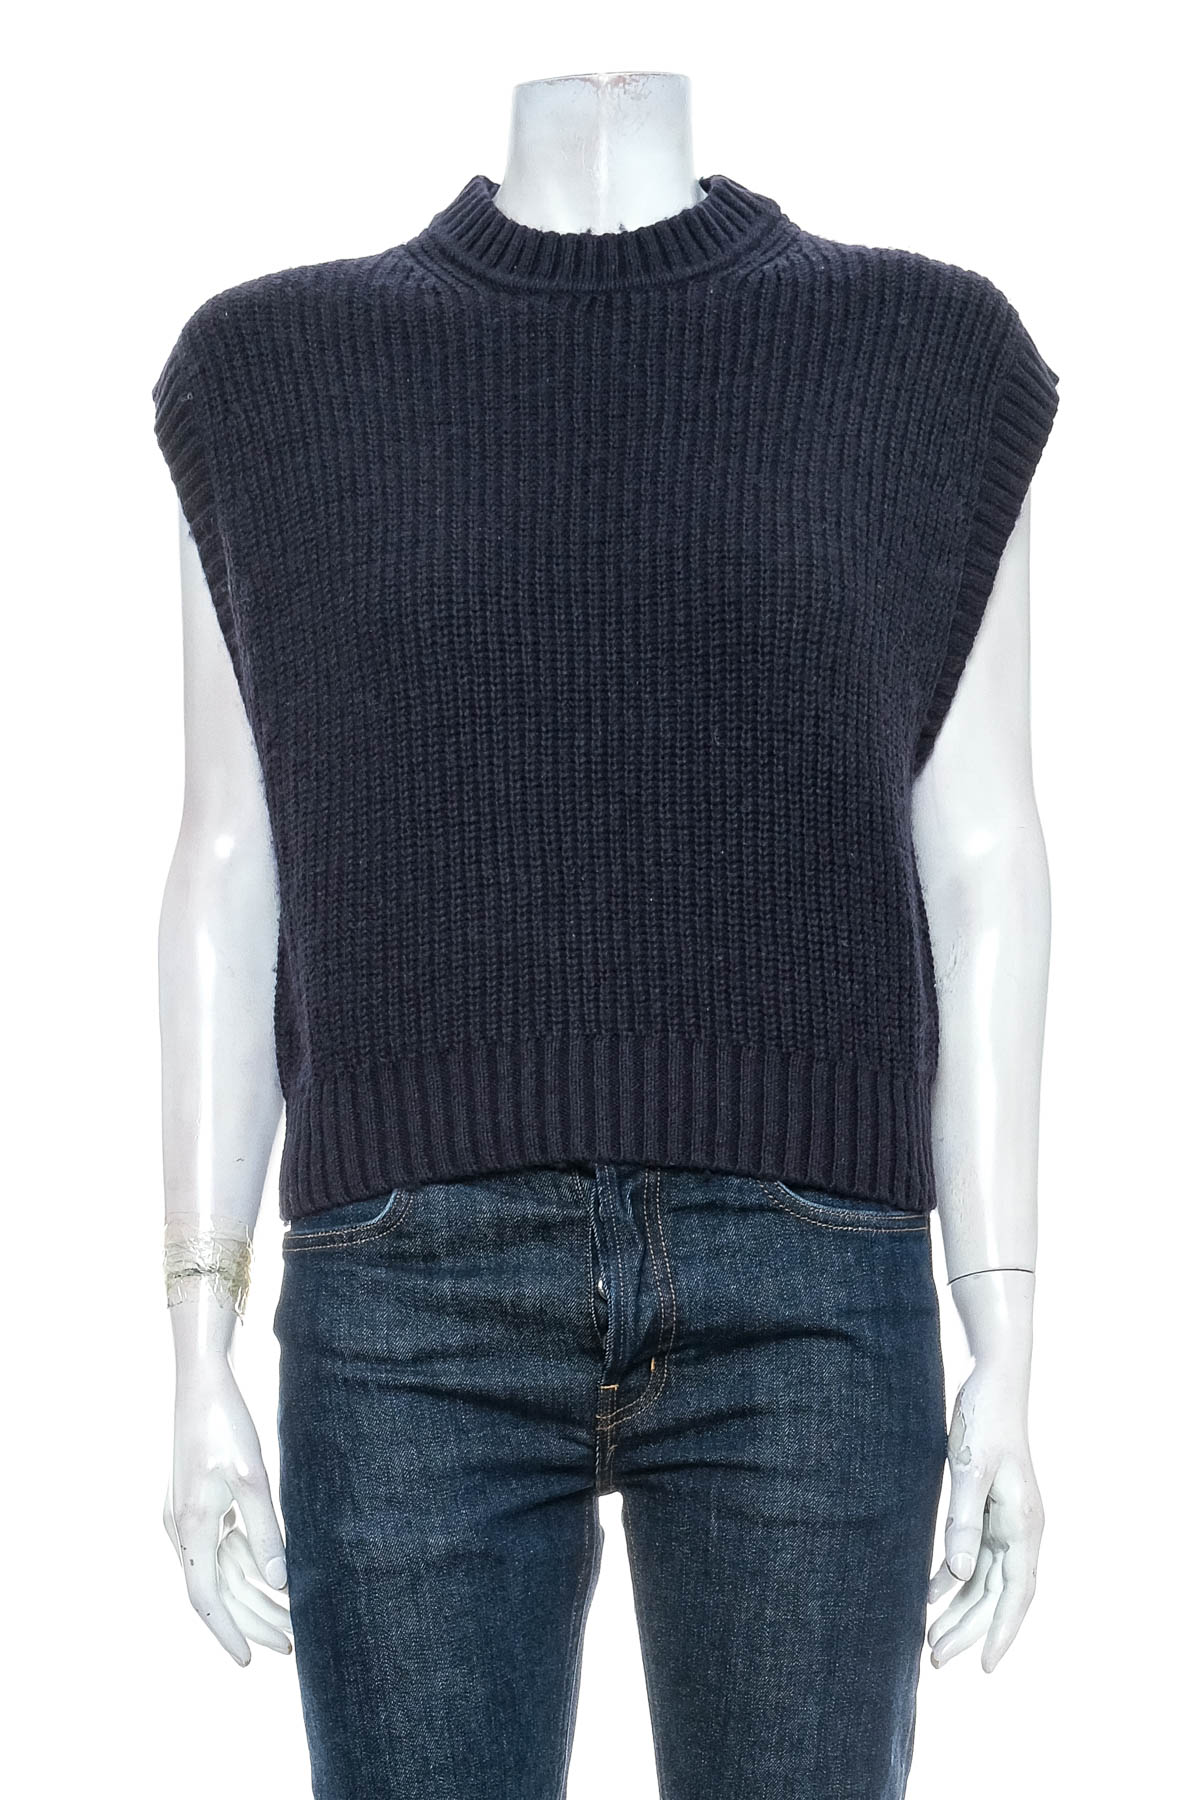 Women's sweater - S.Oliver - 0